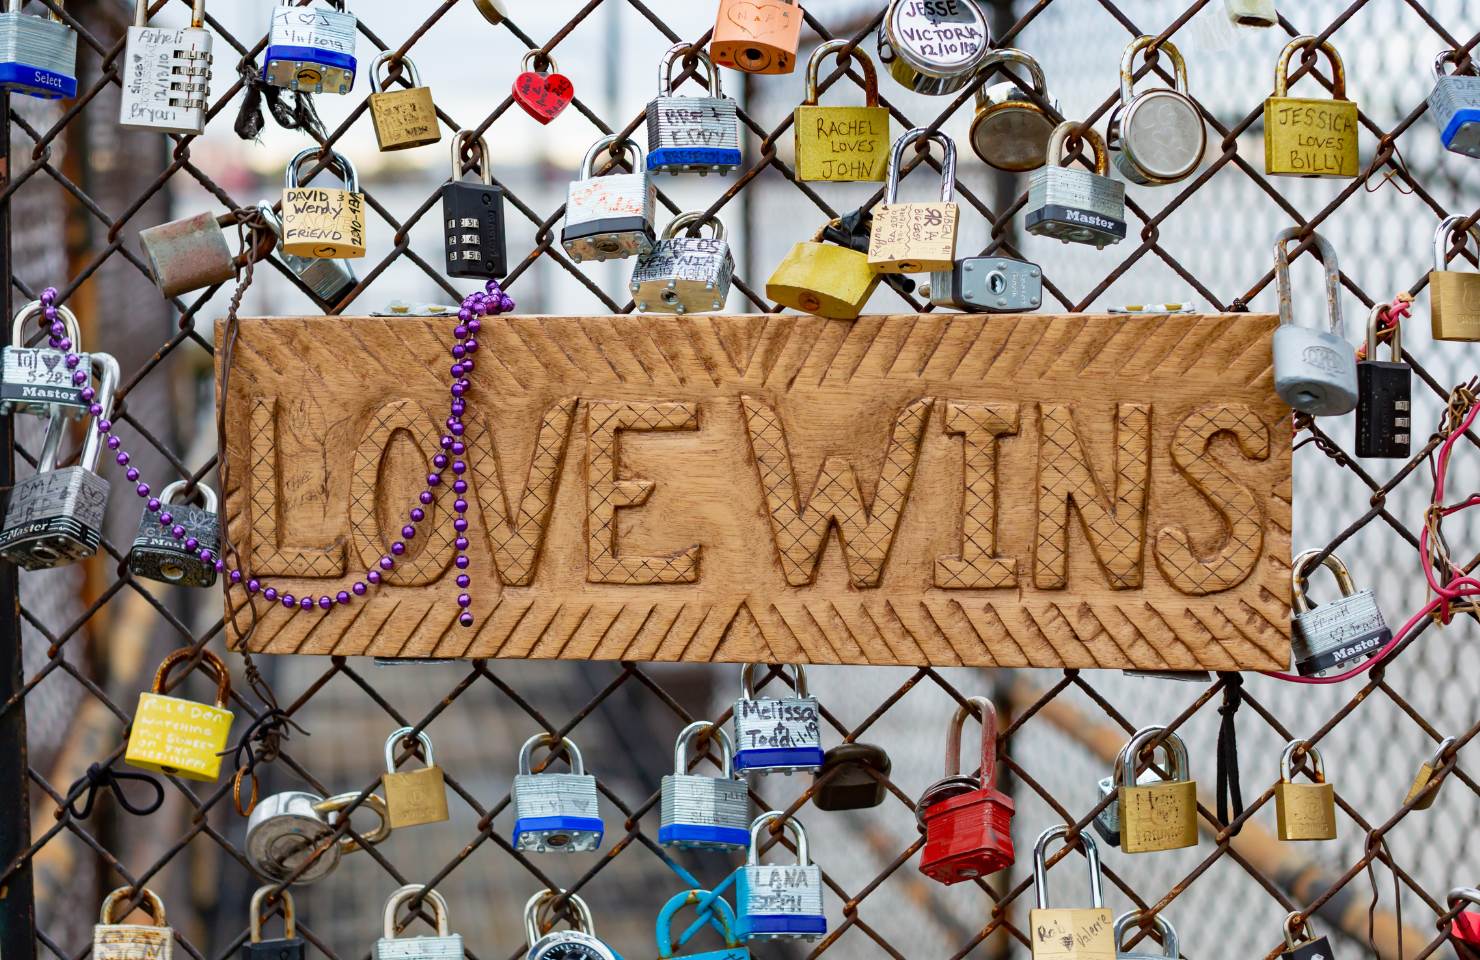 new orleans, home to the love key chains and one of the most romantic destinations in the us